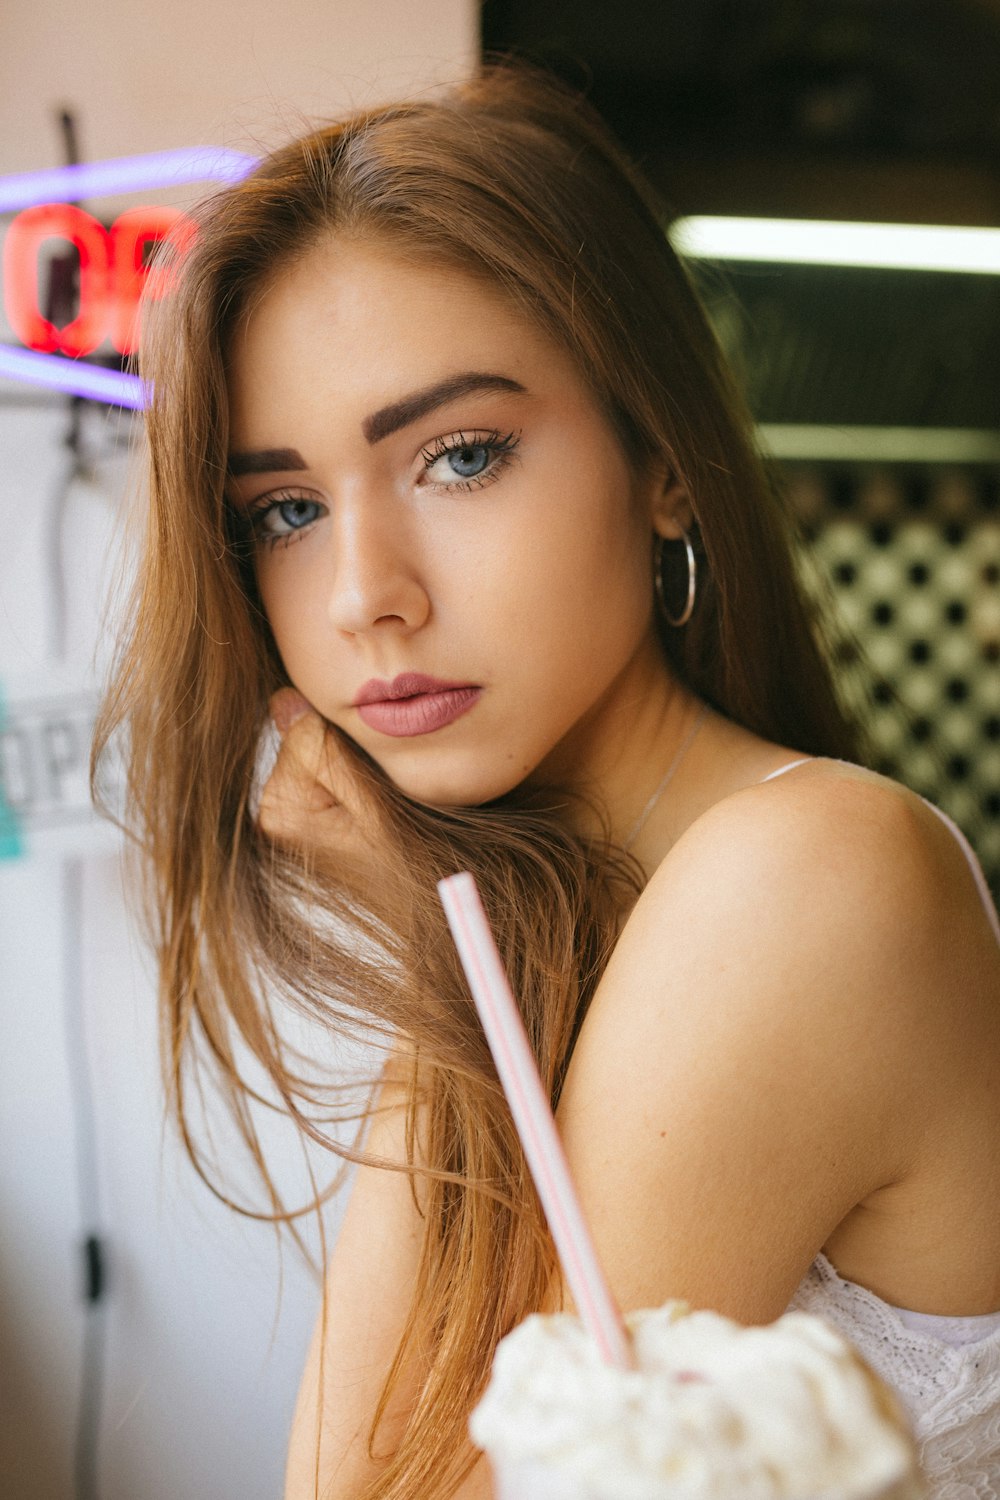 750+ Sweet Girl Pictures | Download Free Images on Unsplash